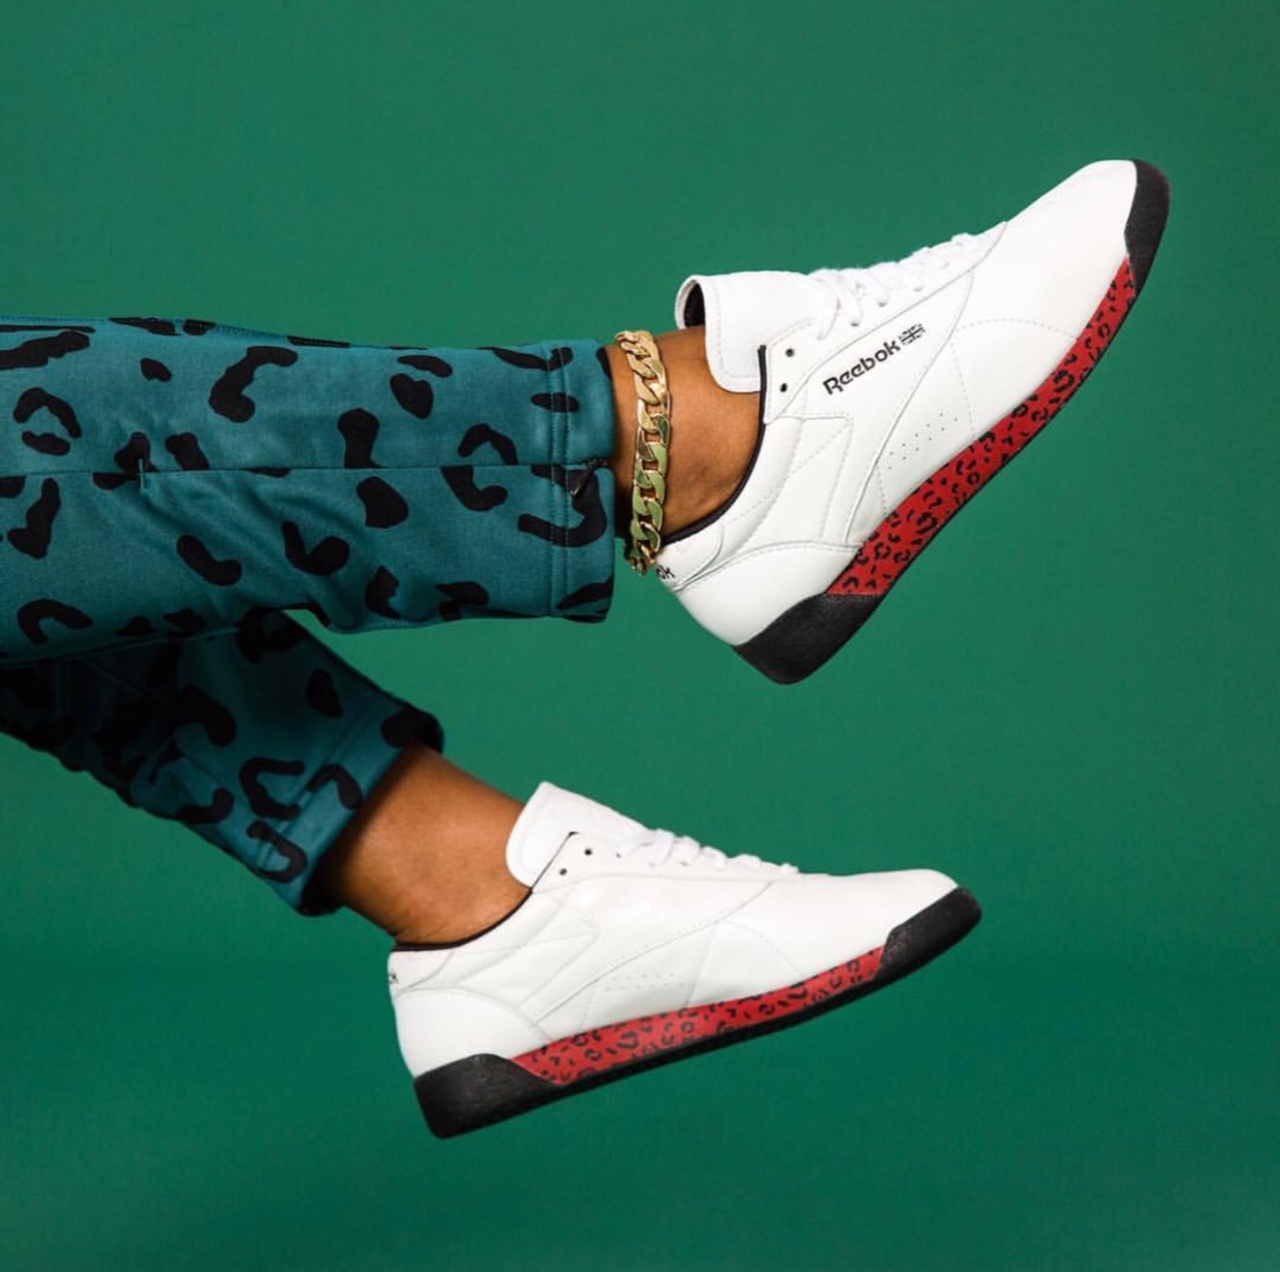 Melody Ehsani is Releasing a Fierce Final Collection With Reebok